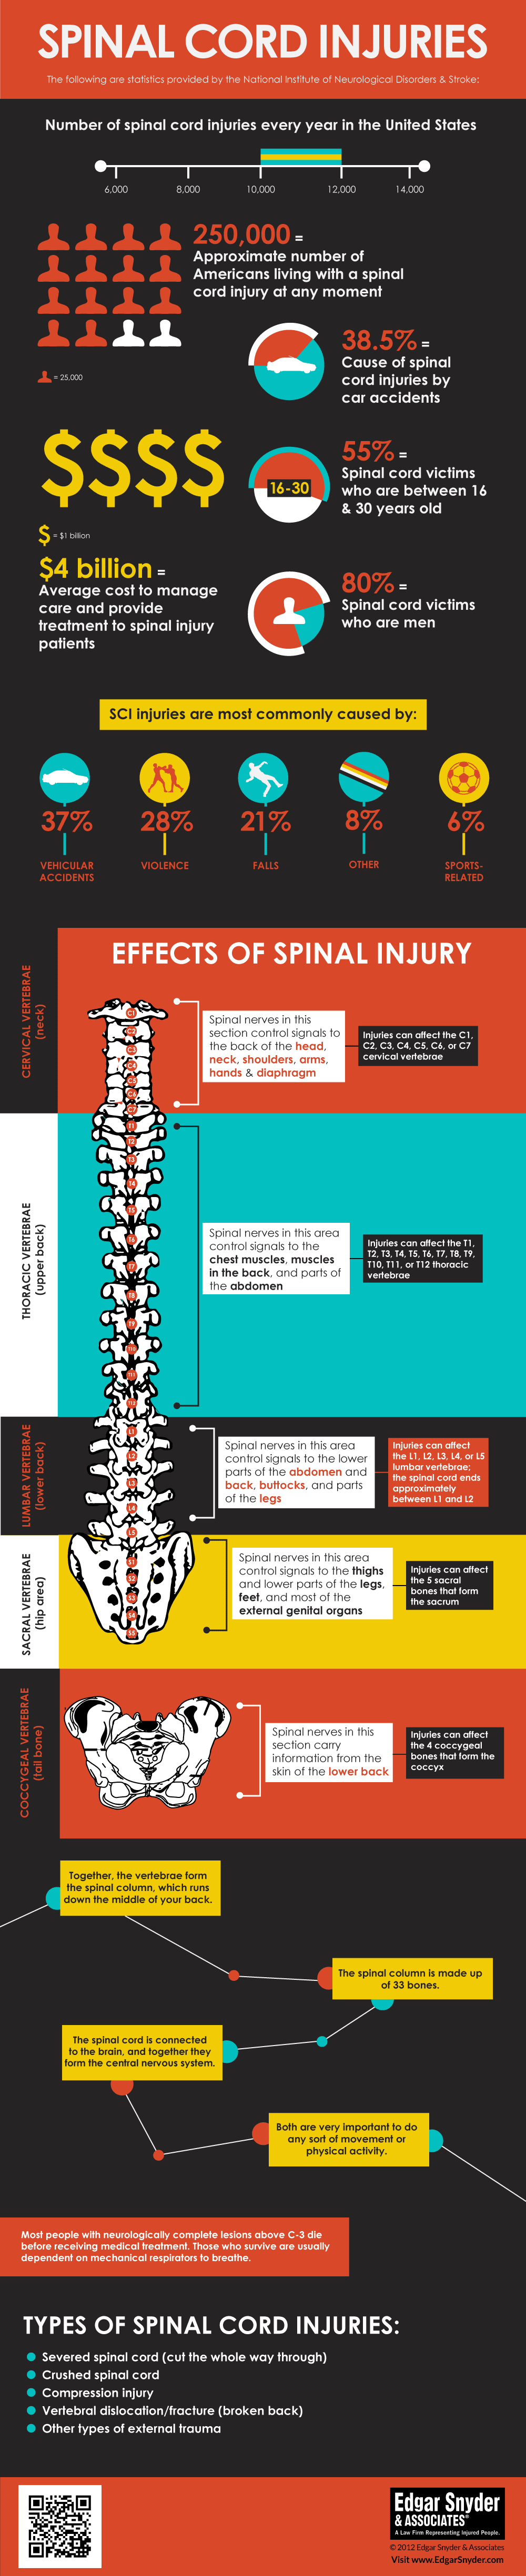 Spinal Cord Injuries and Costs